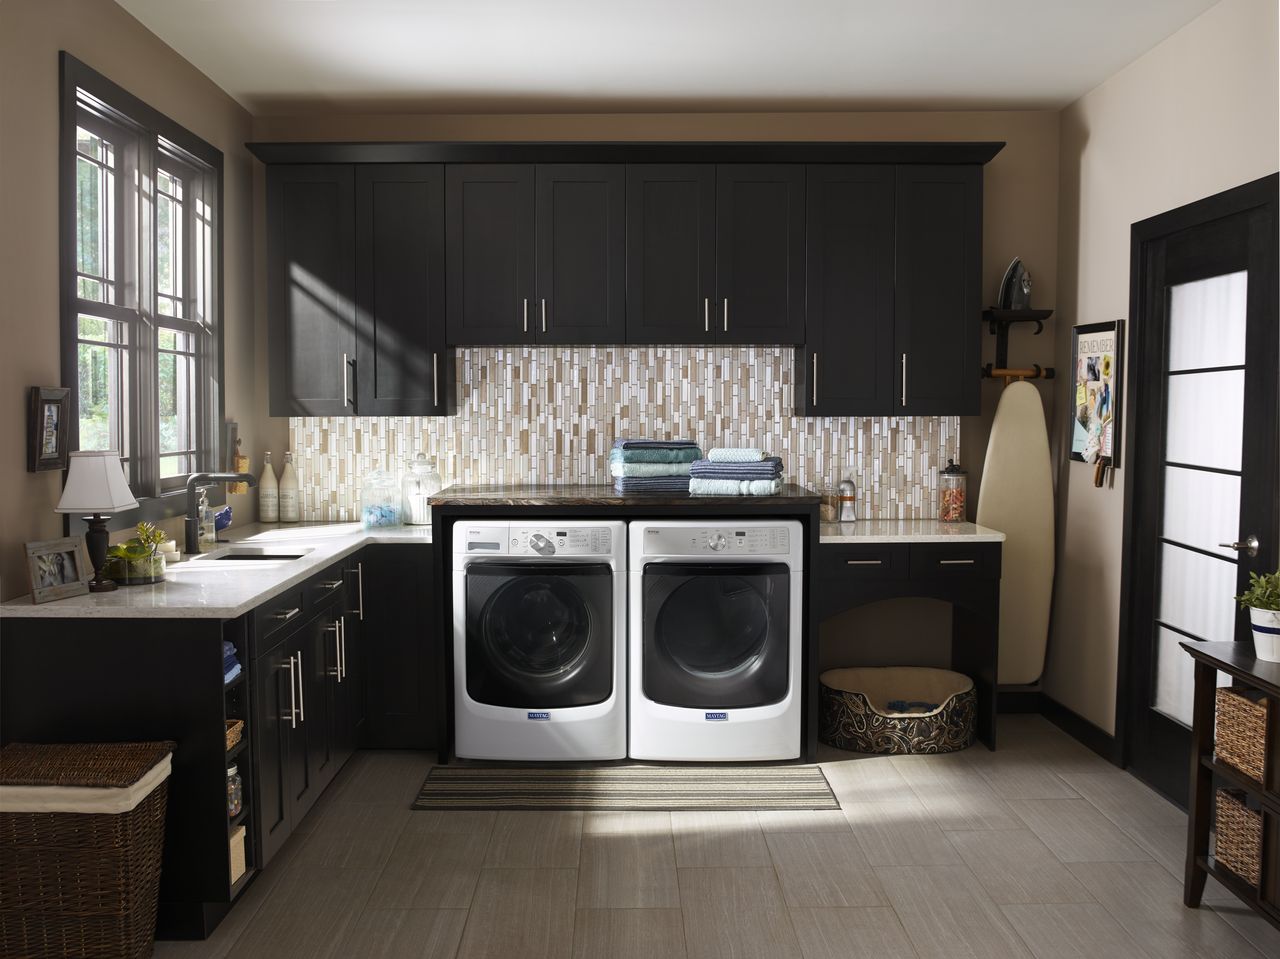 Maytag Front Load Washer and Dryer stowed under a counter.